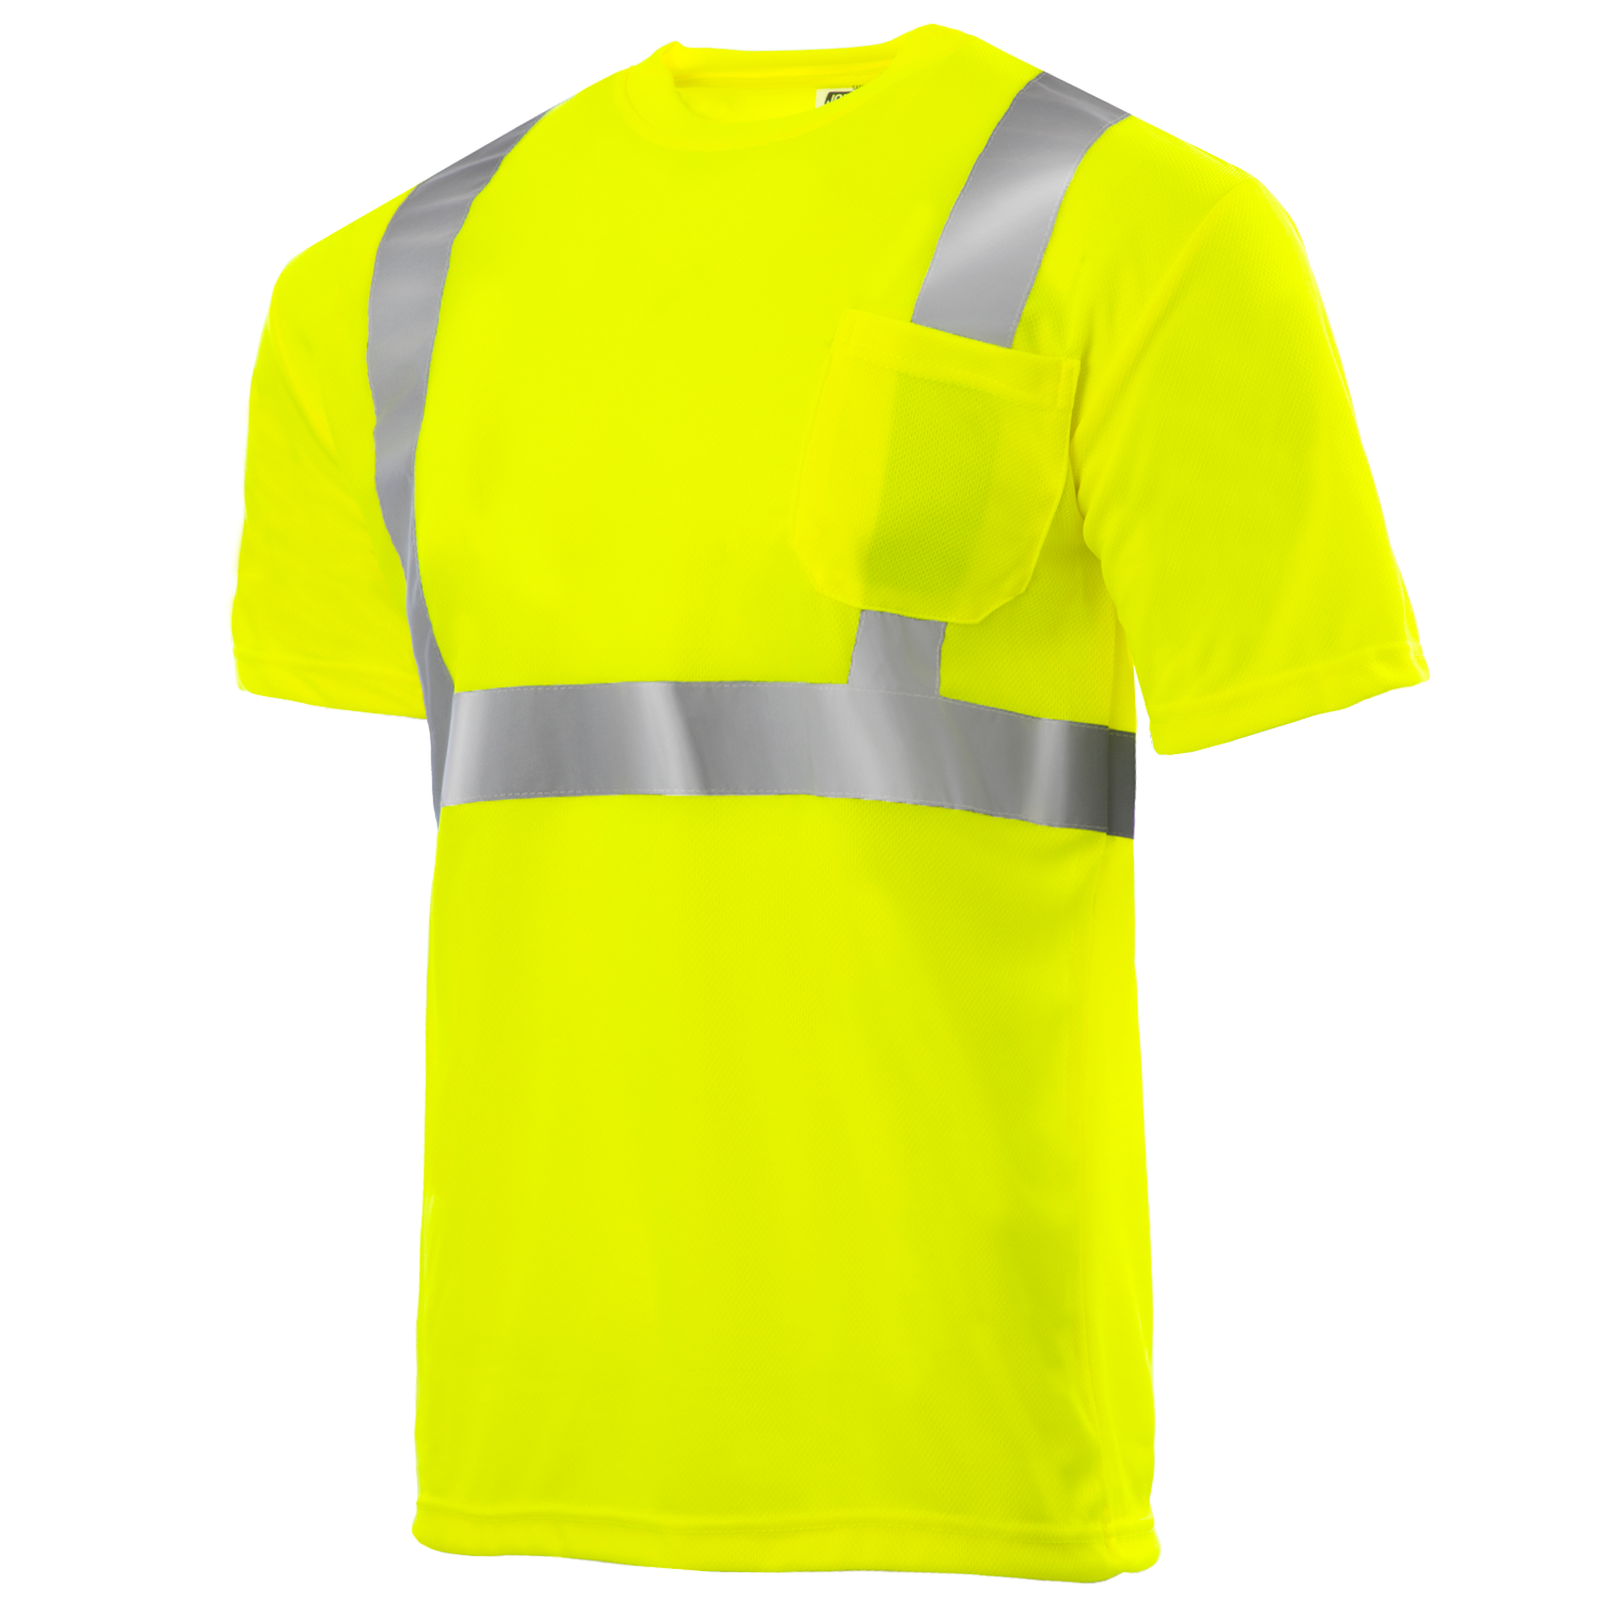 Yellow hi-vis reflective safety shirt with chest pocket ANSI class 2 type R